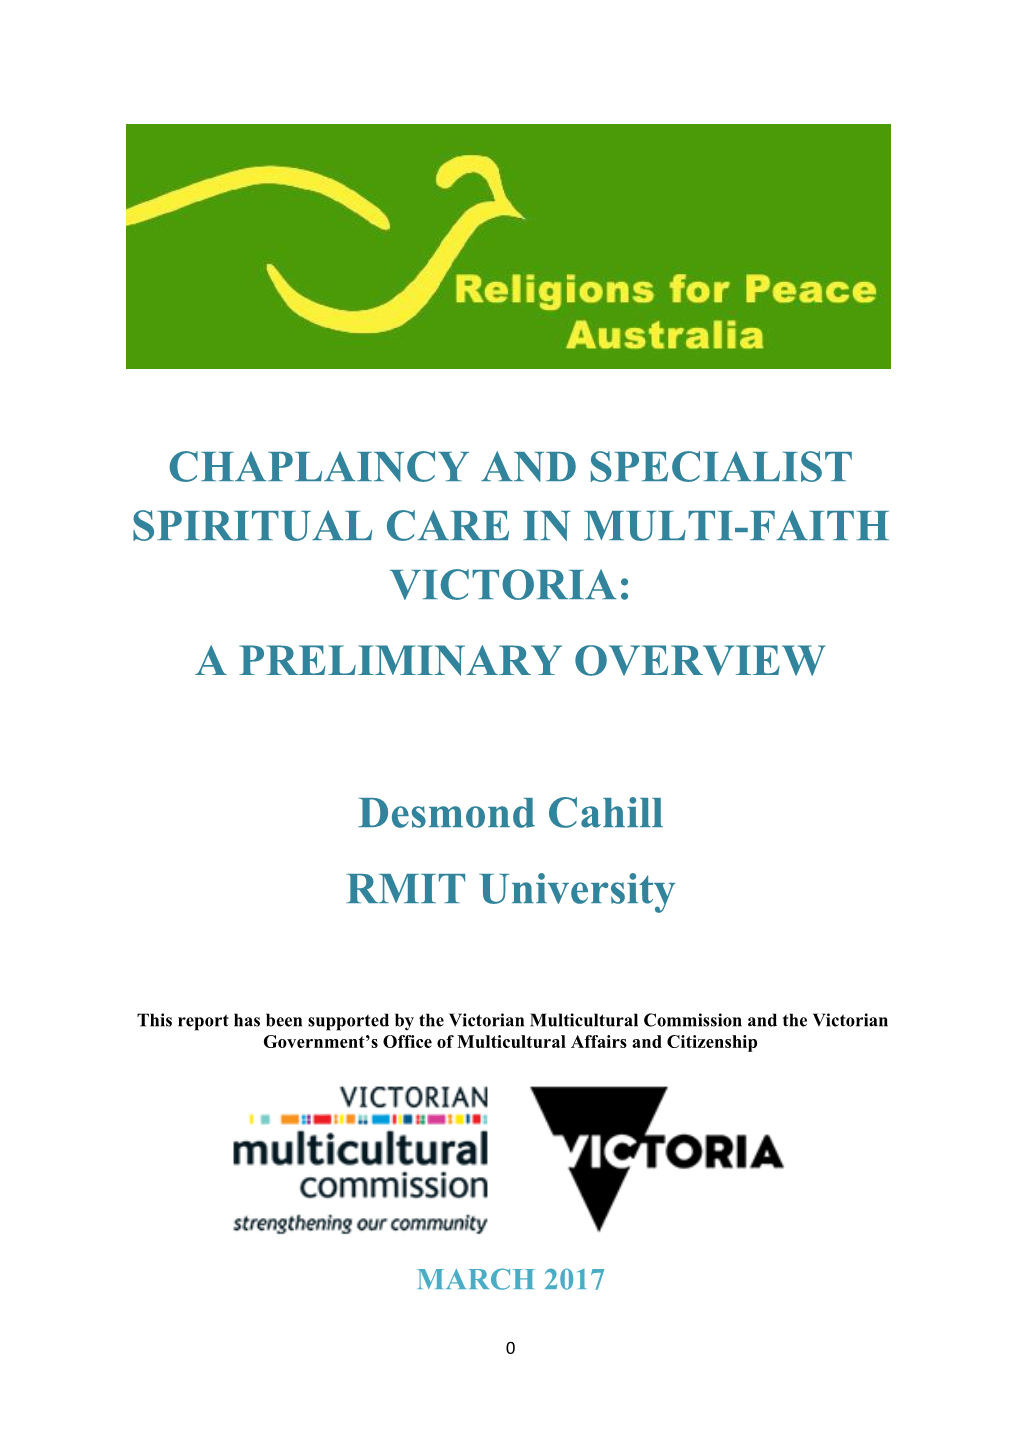 Chaplaincy and Specialist Spiritual Care in Multi-Faith Victoria: a Preliminary Overview